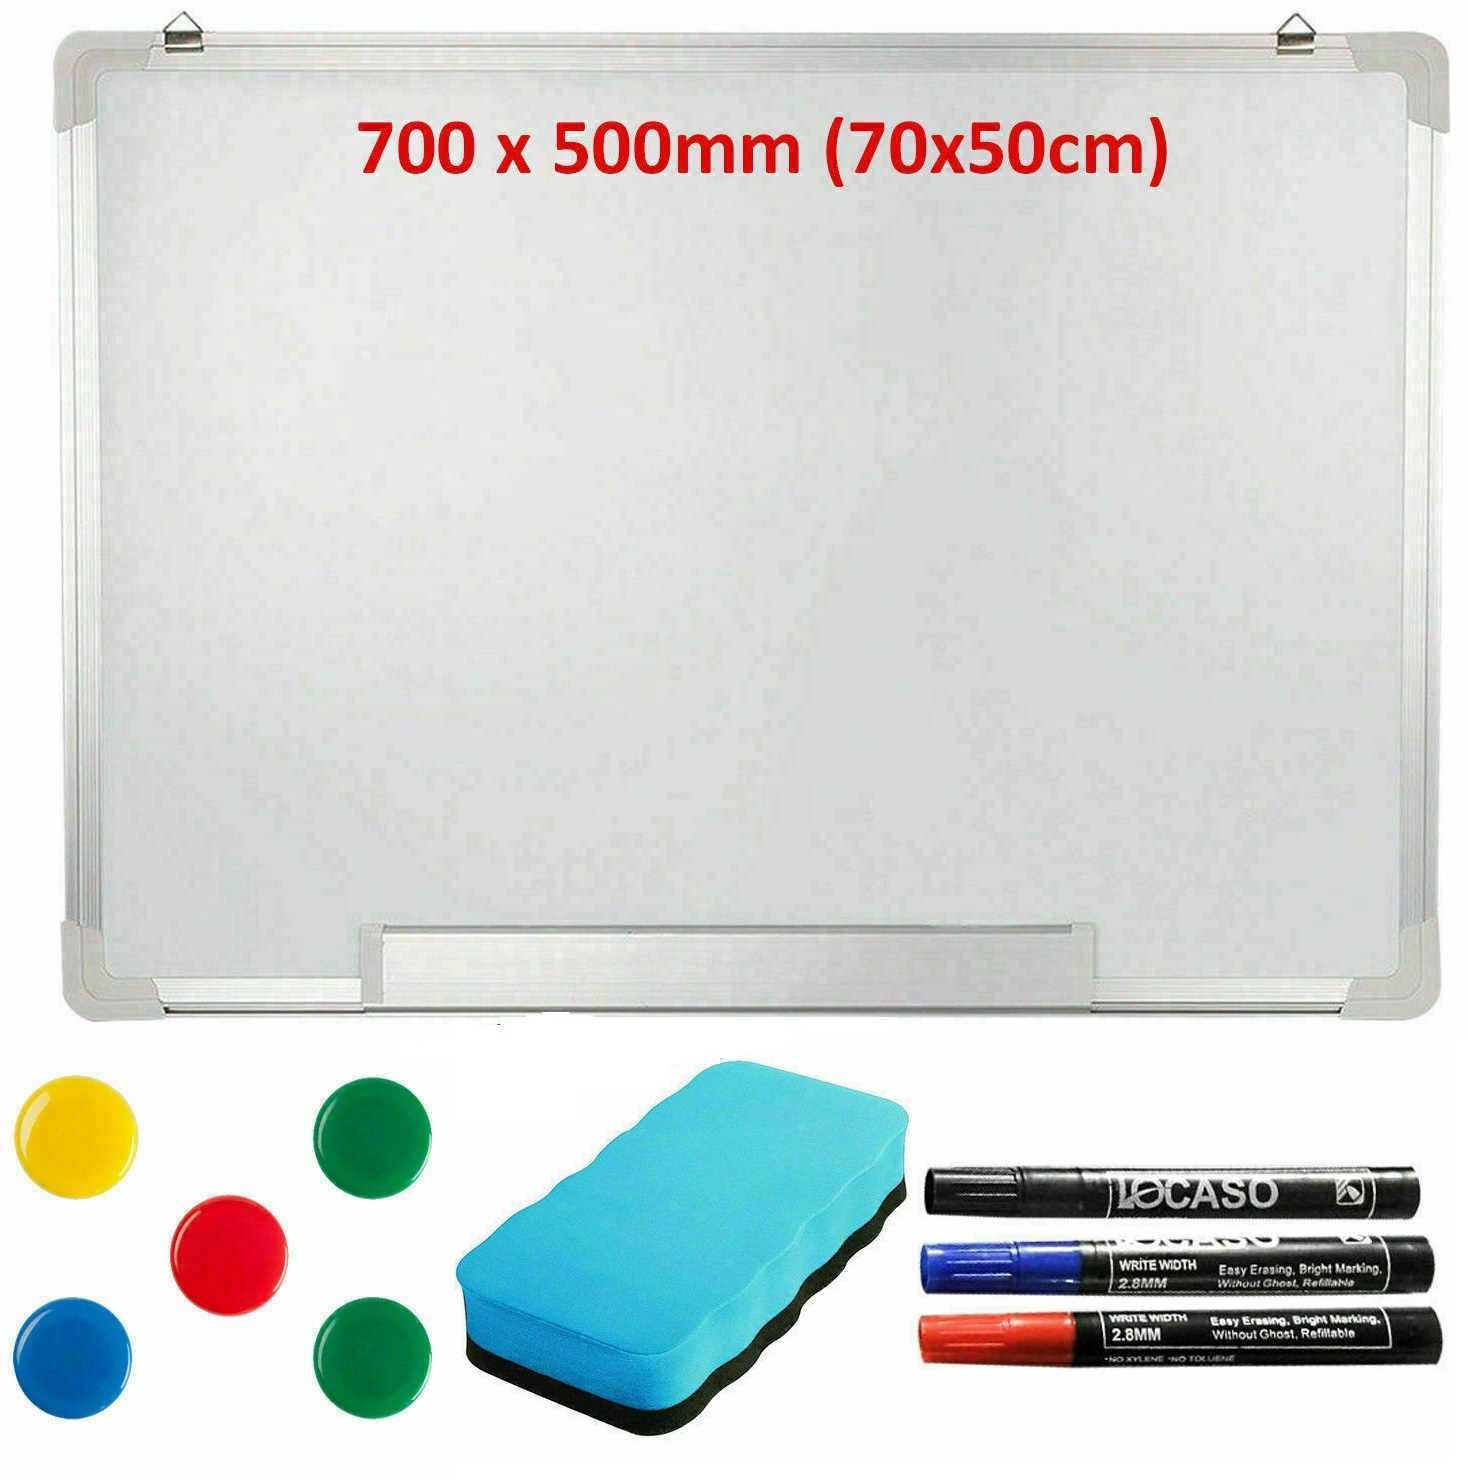 700 X 500mm Magnetic Whiteboard Small Large White Board Dry Wipe Office Home School Notice